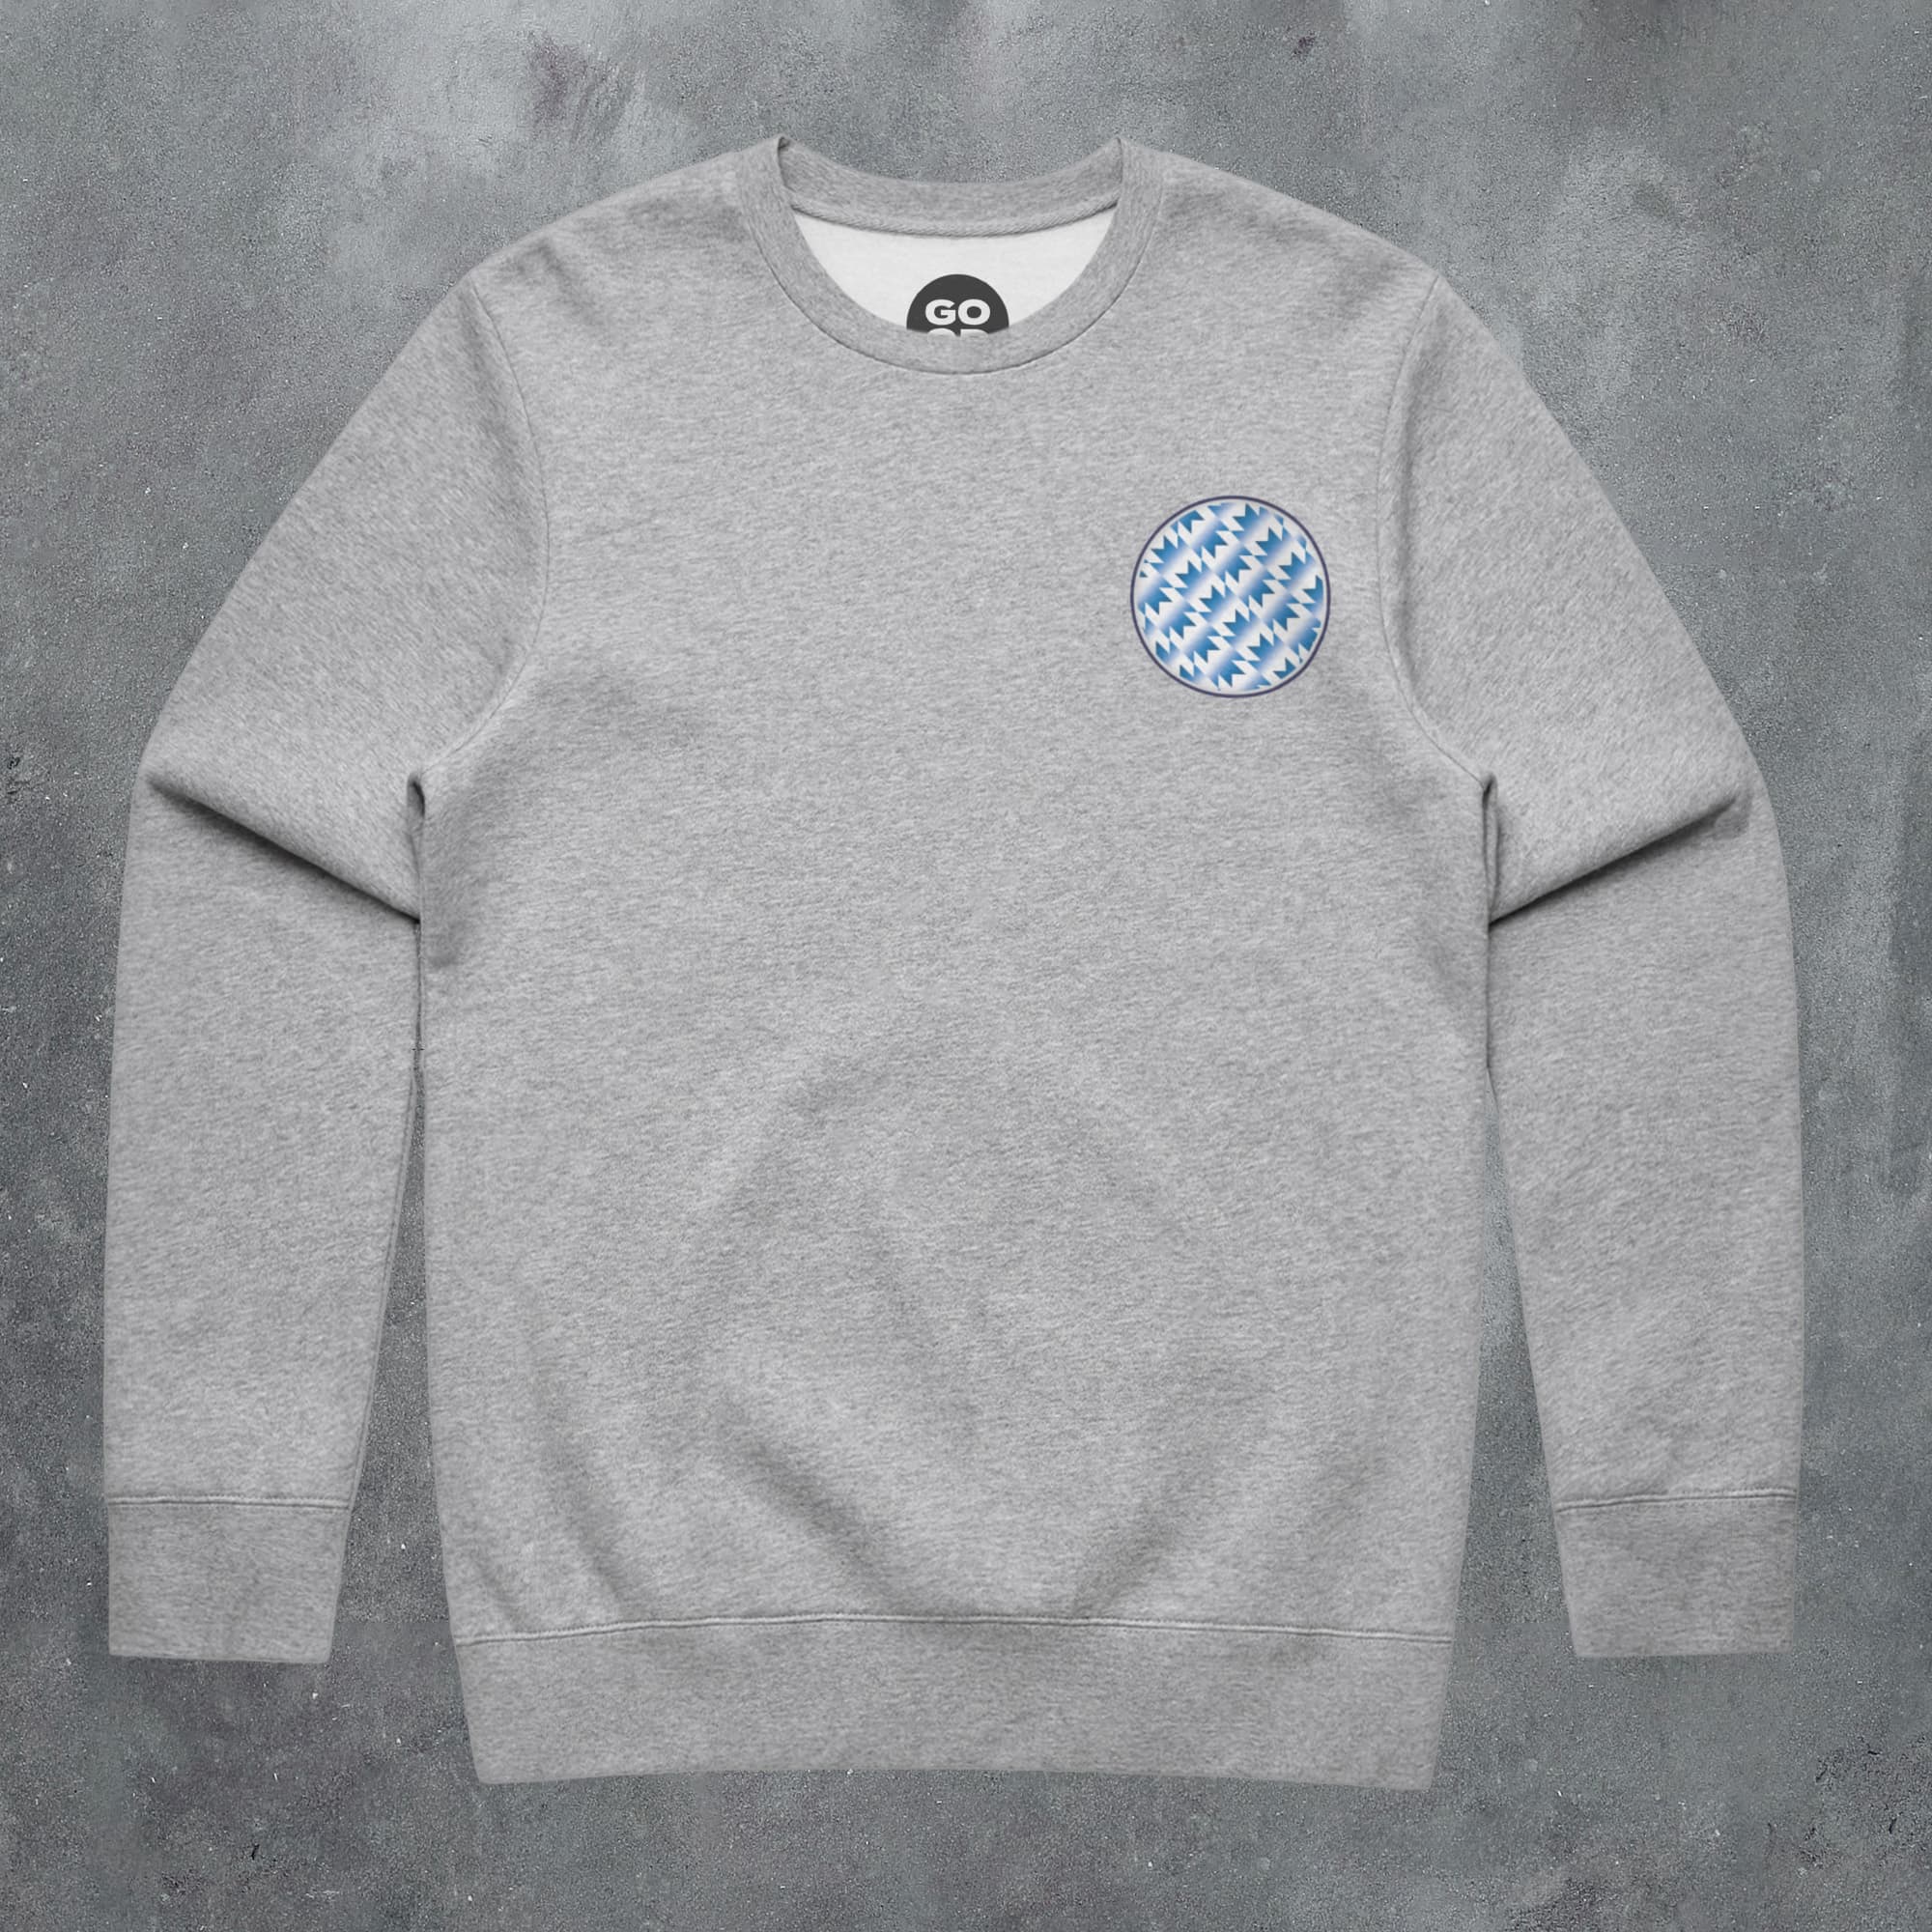 a grey sweatshirt with a blue and white checkered design on the front